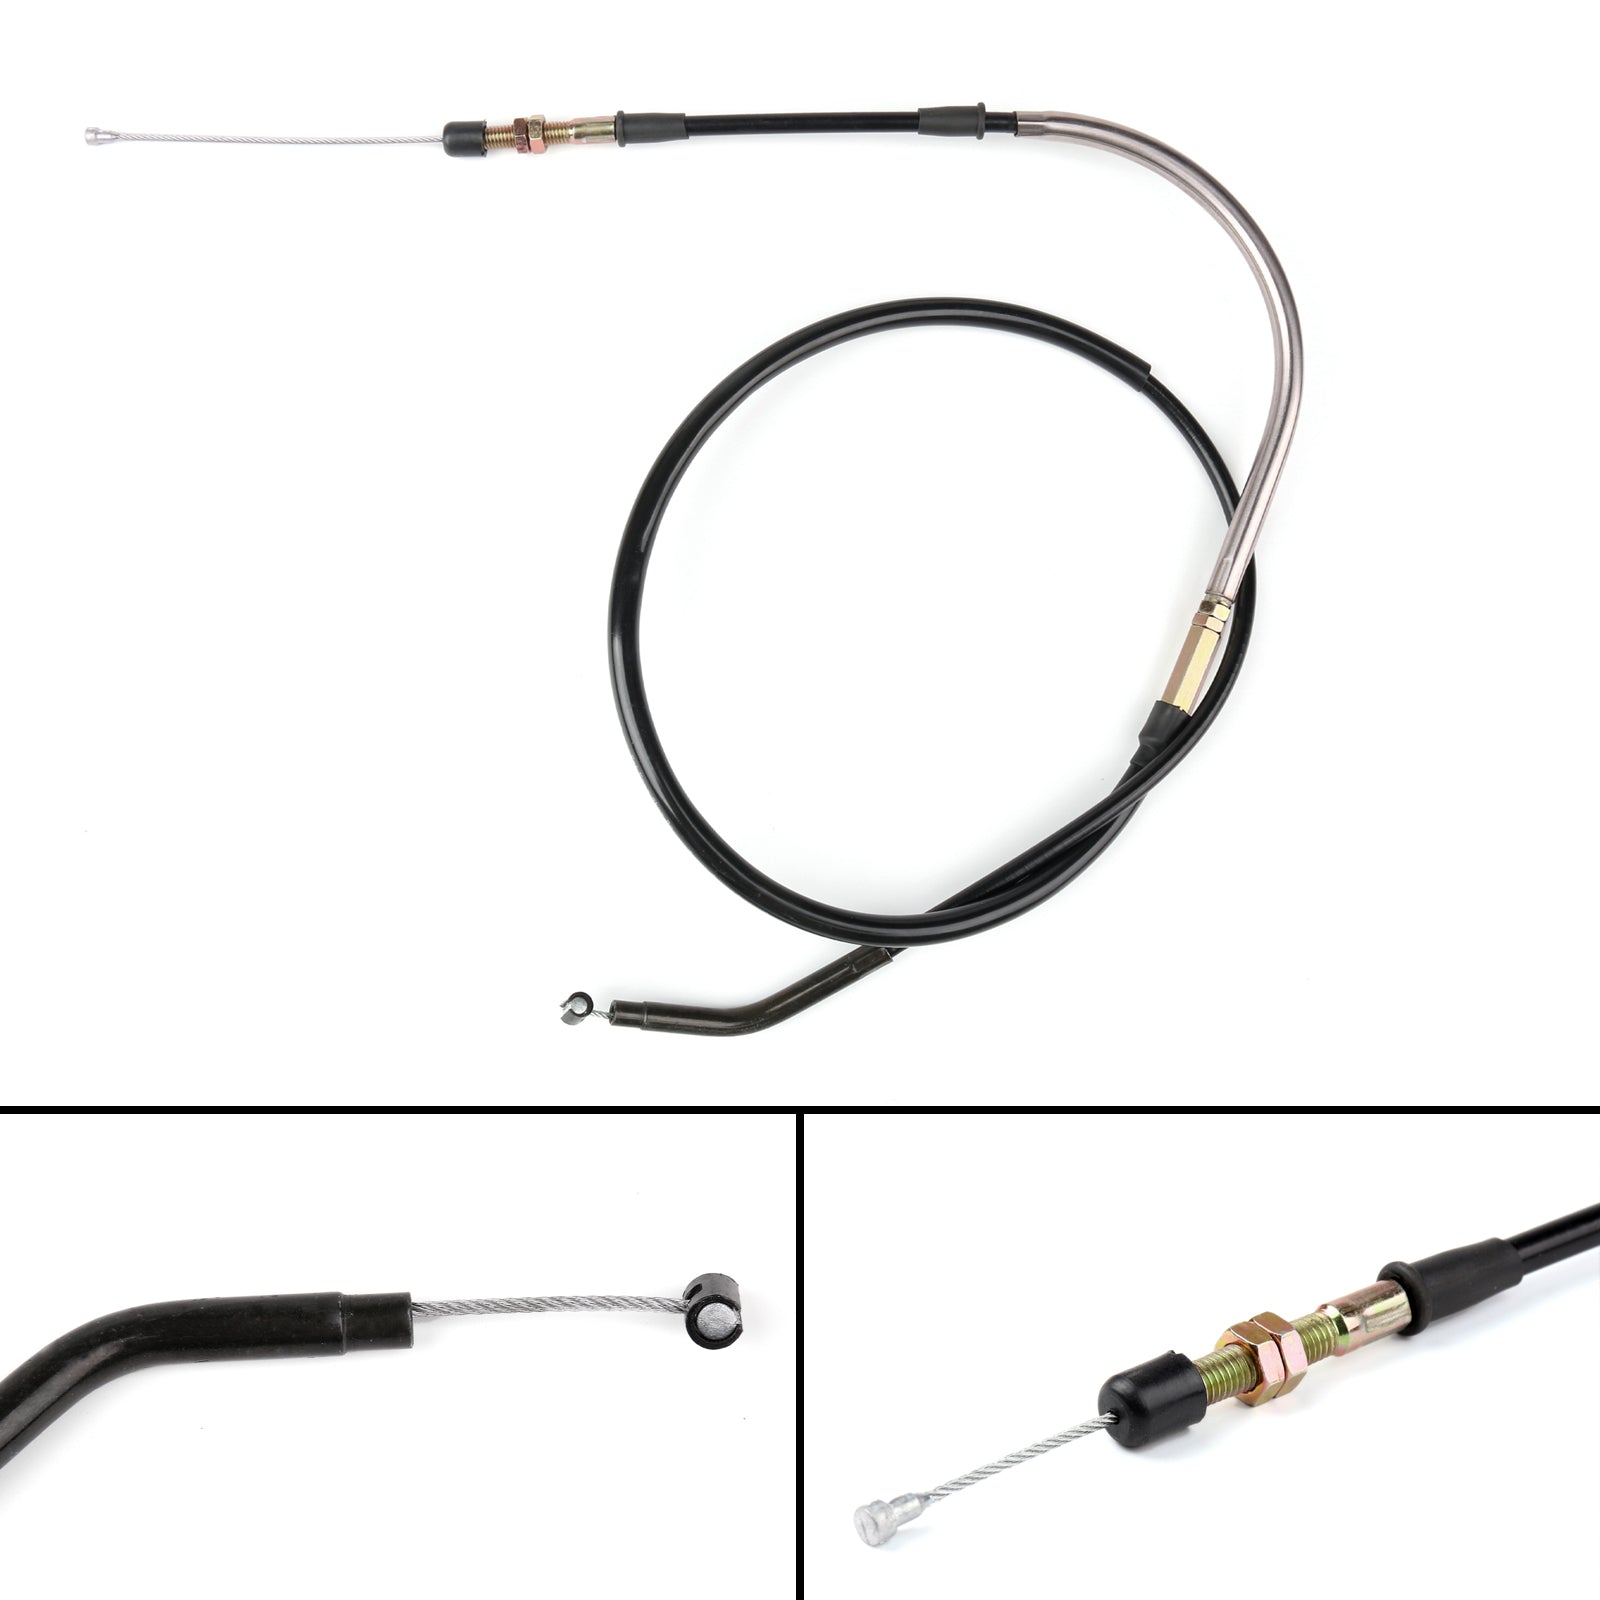 Wire Steel Clutch Cable Replacement 3C3-26335-00-00 For Yamaha FZ8 FZ8-S FAZER Generic